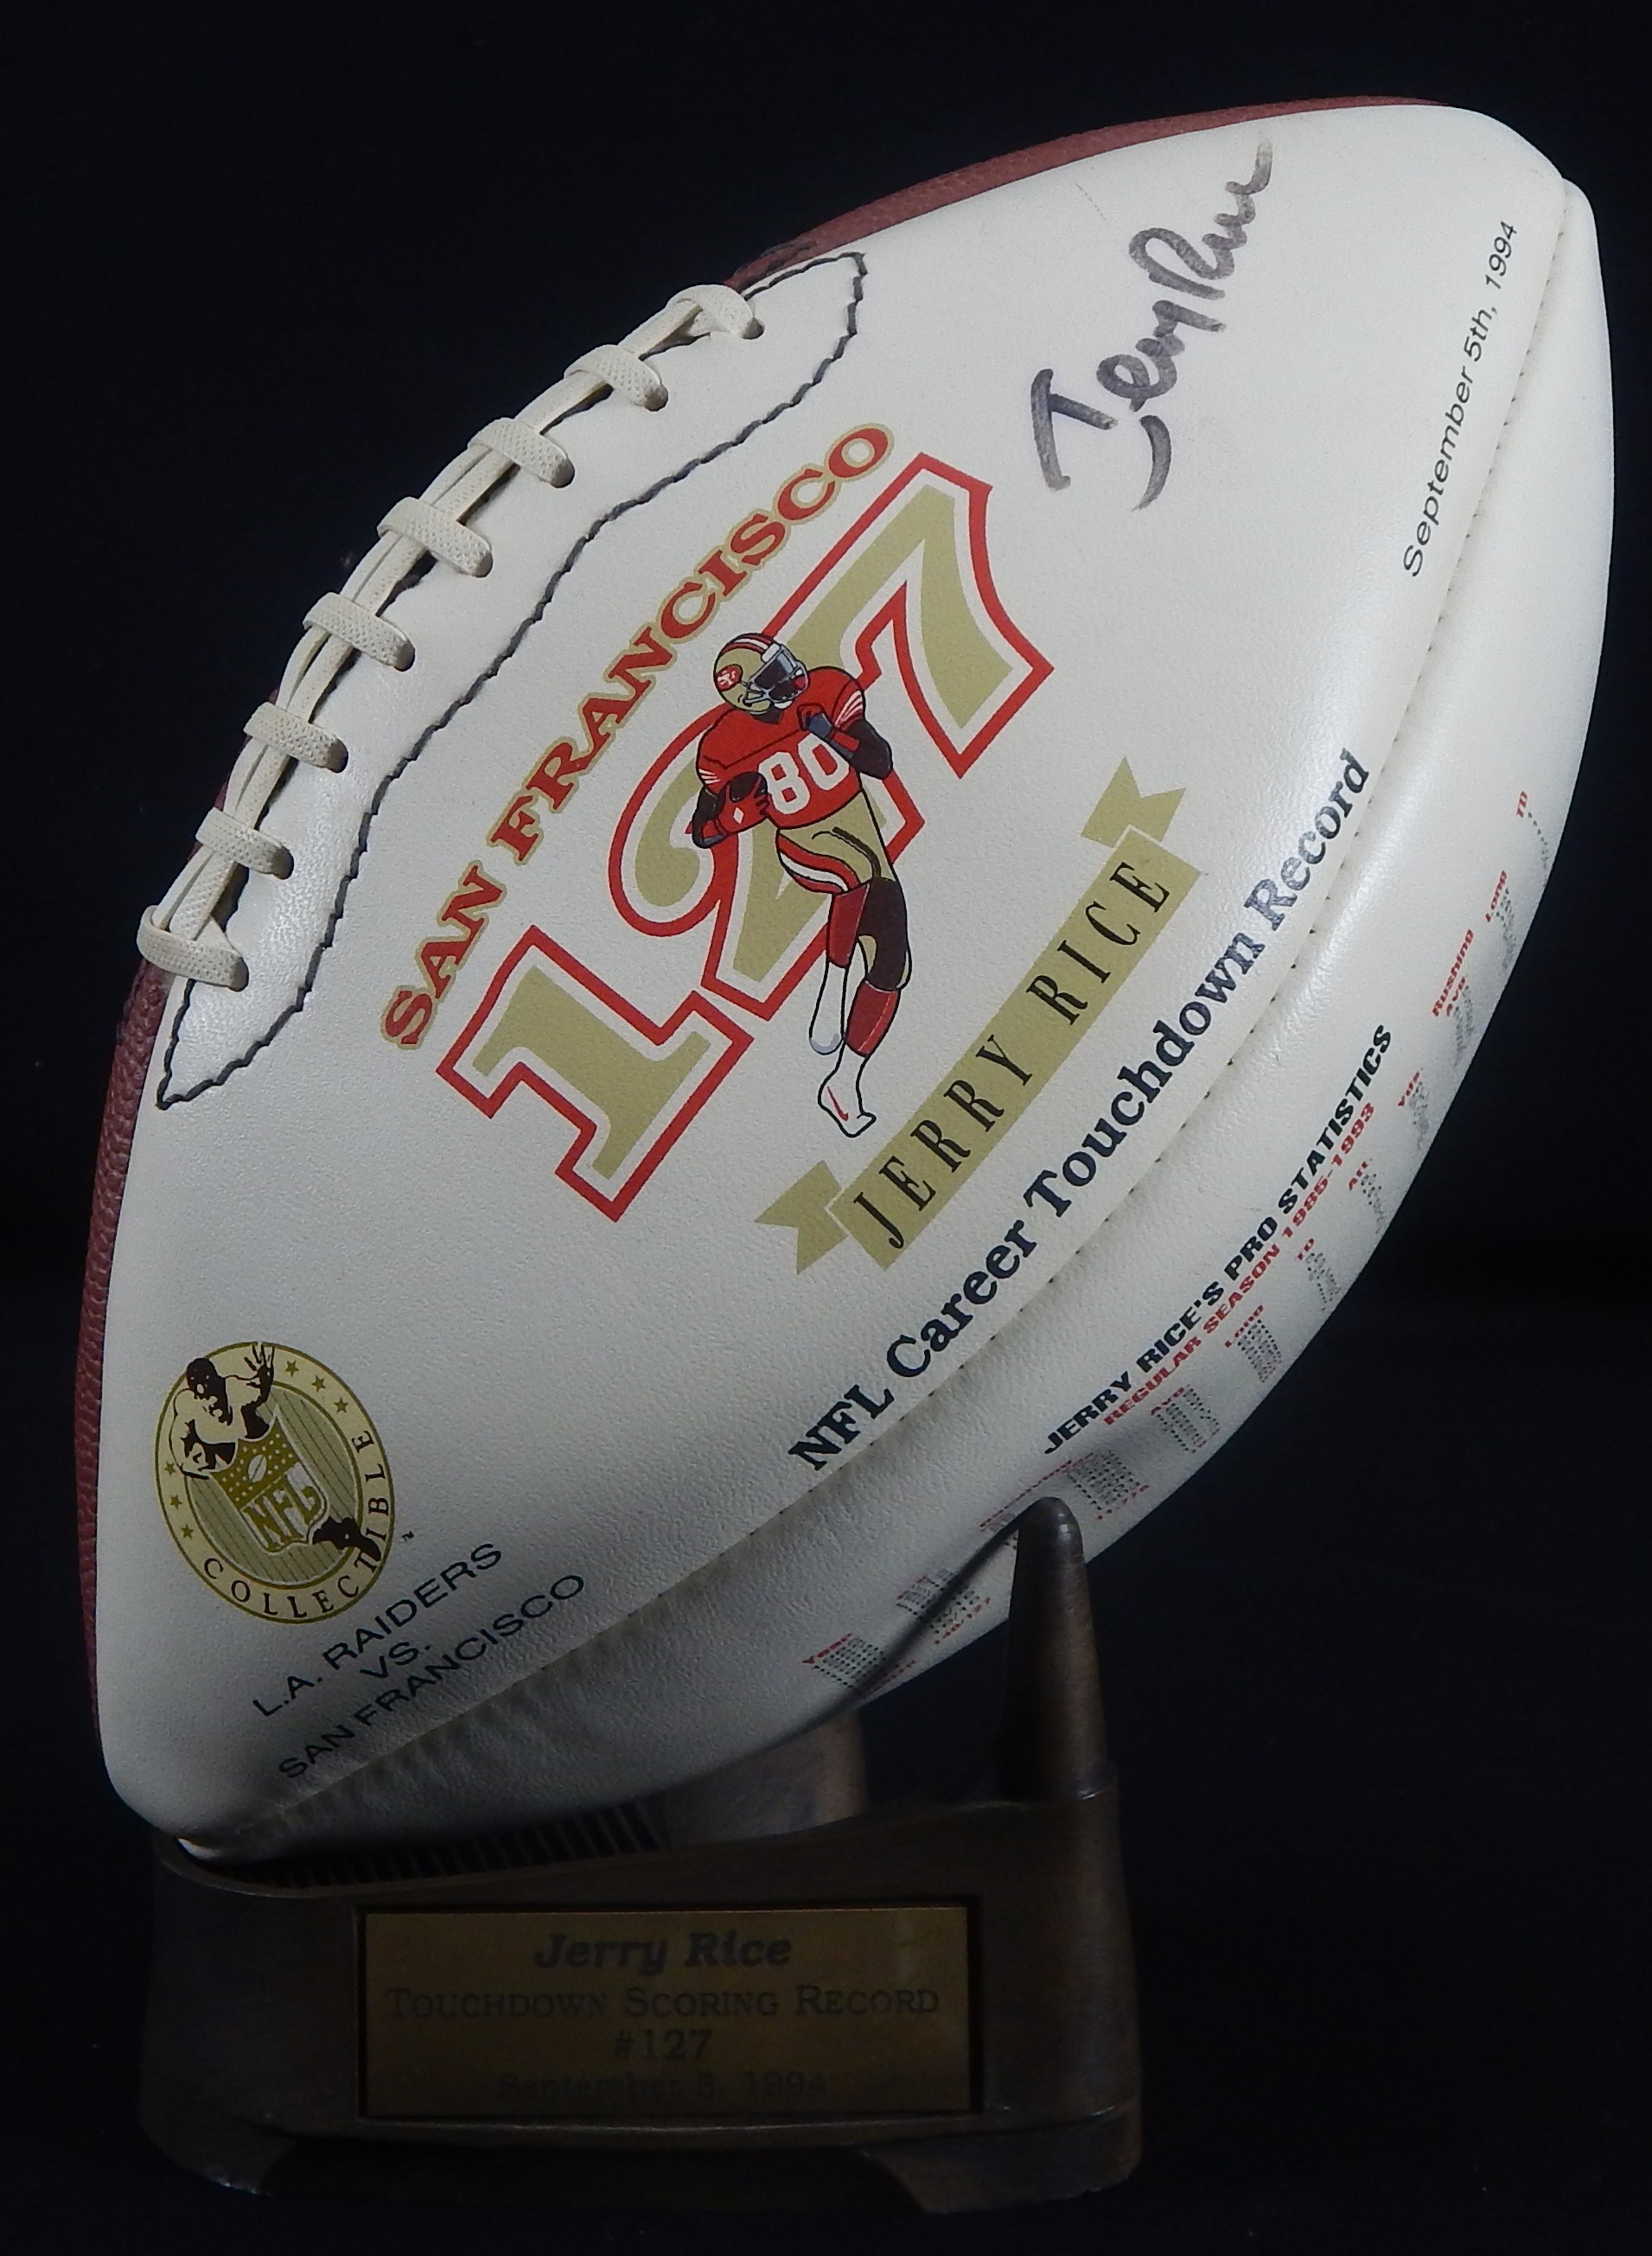 Jerry Rice Touchdown Record Breaking Commemorative Signed Football (PSA/DNA)